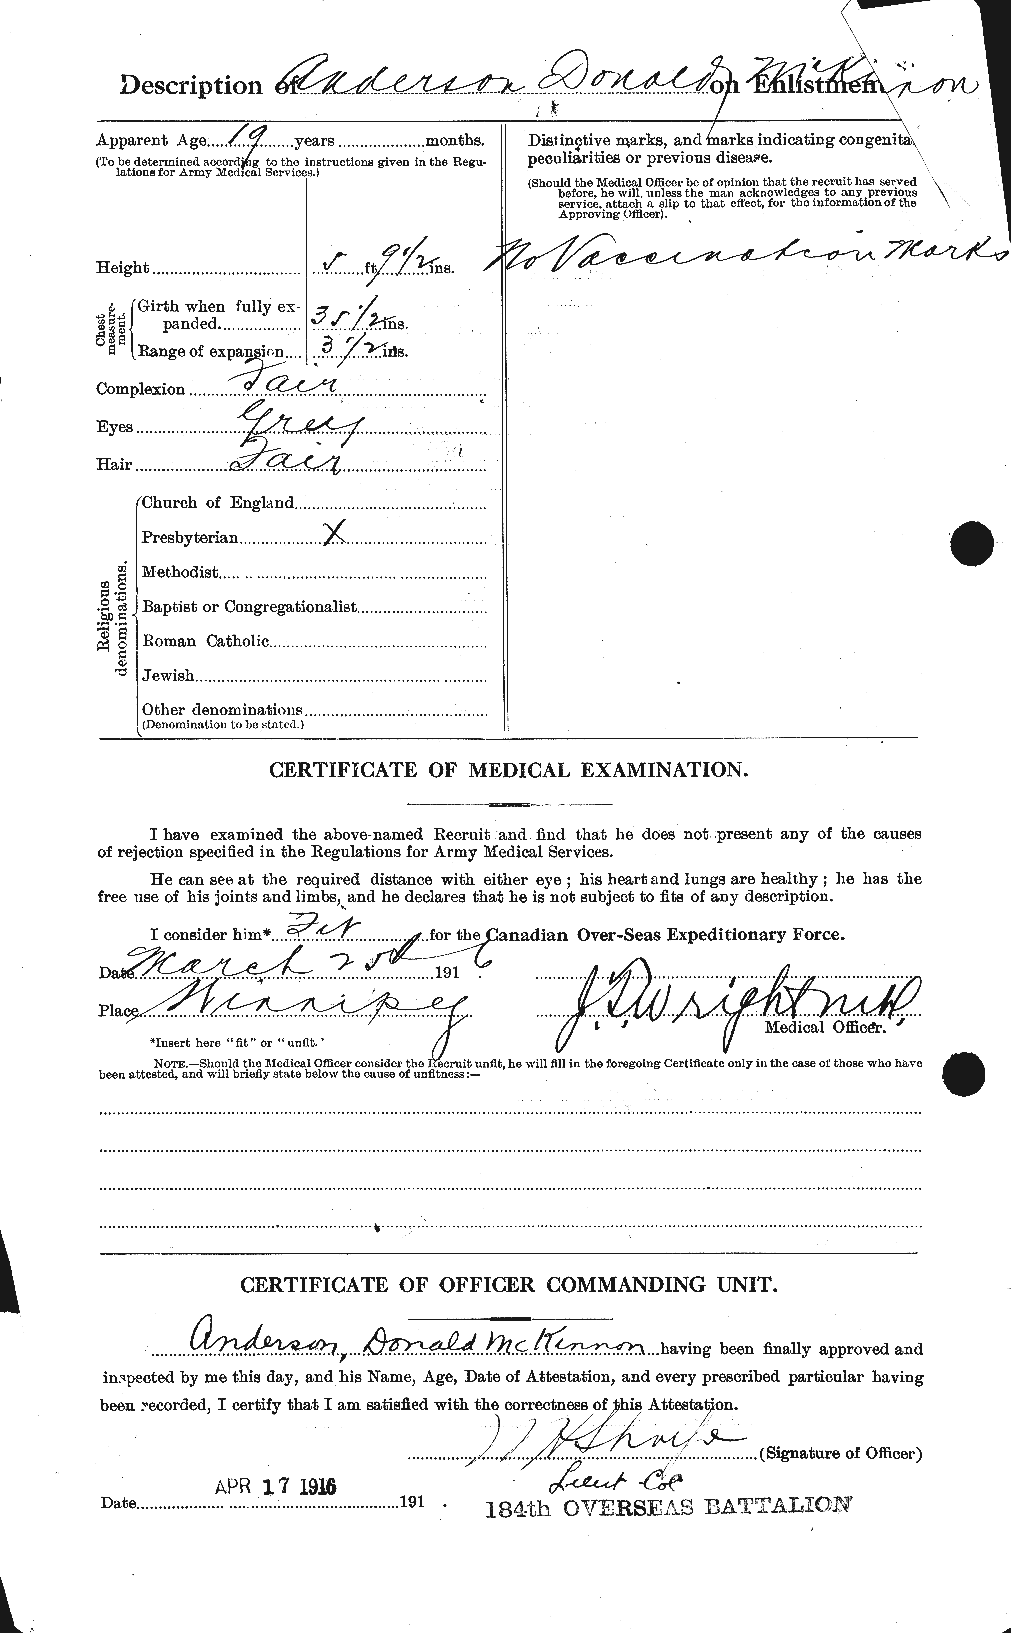 Personnel Records of the First World War - CEF 209981b